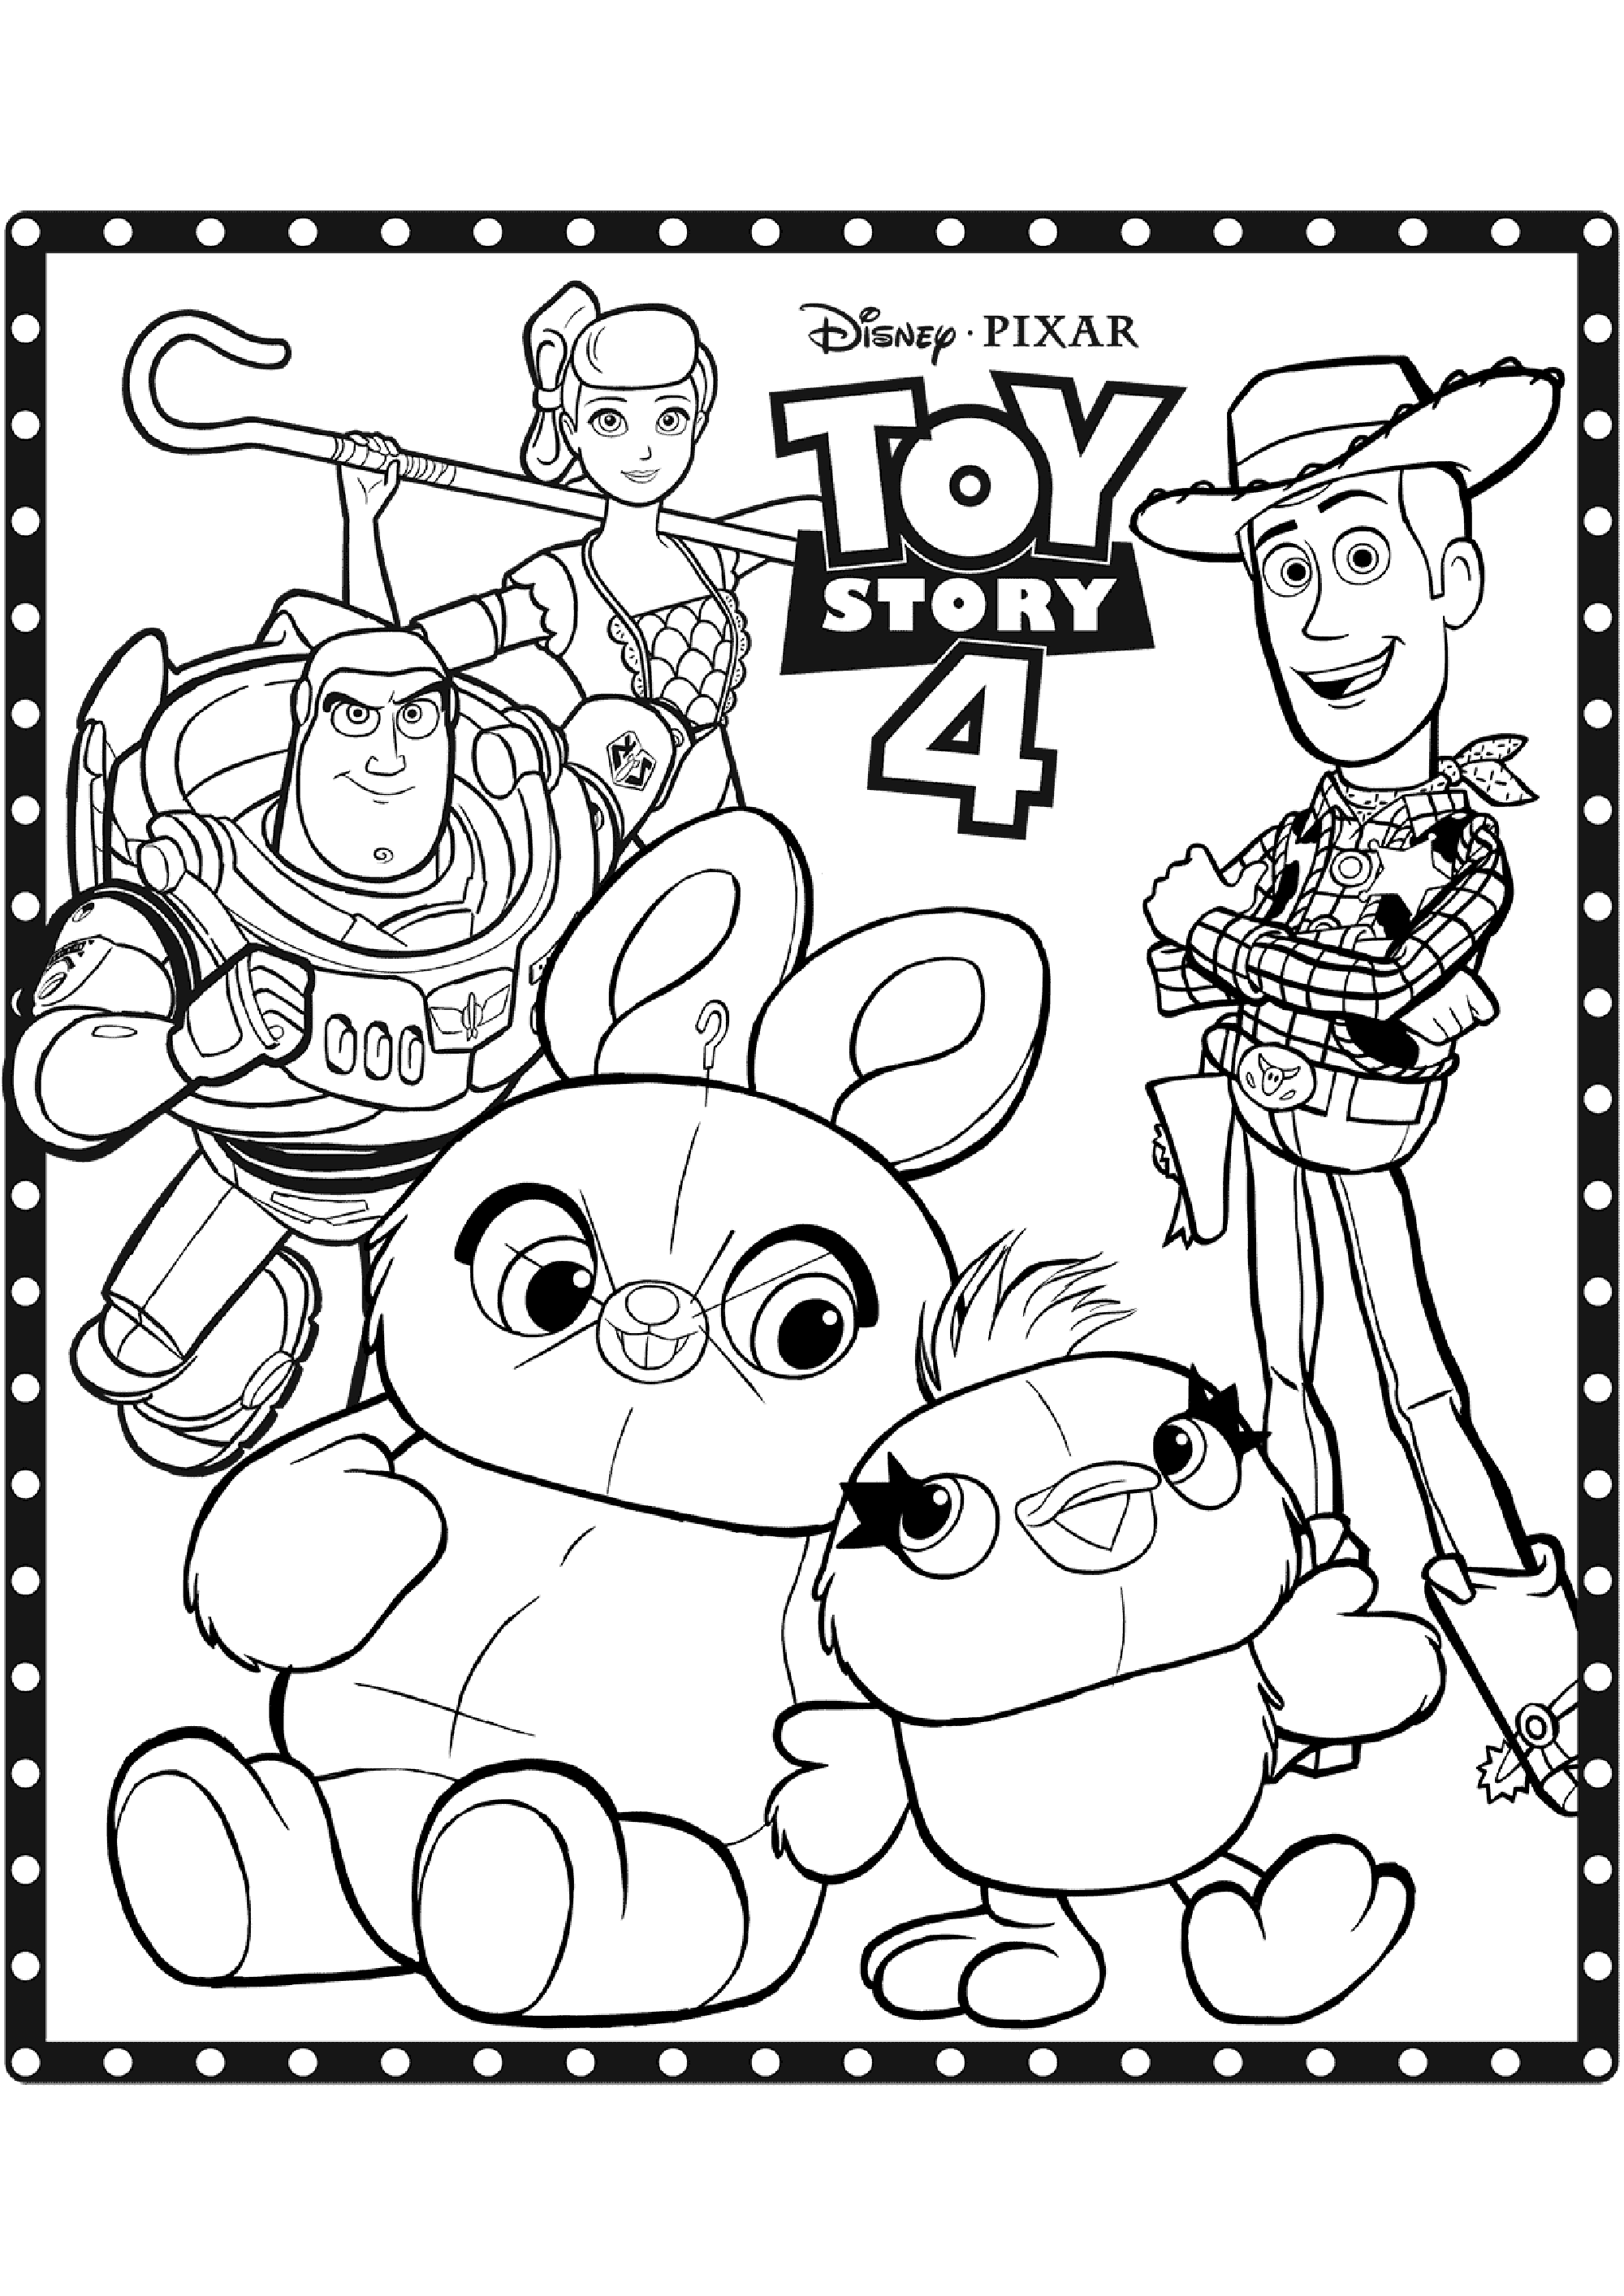 Toy Story 4 coloring page (Disney / Pixar) All the characters Toy